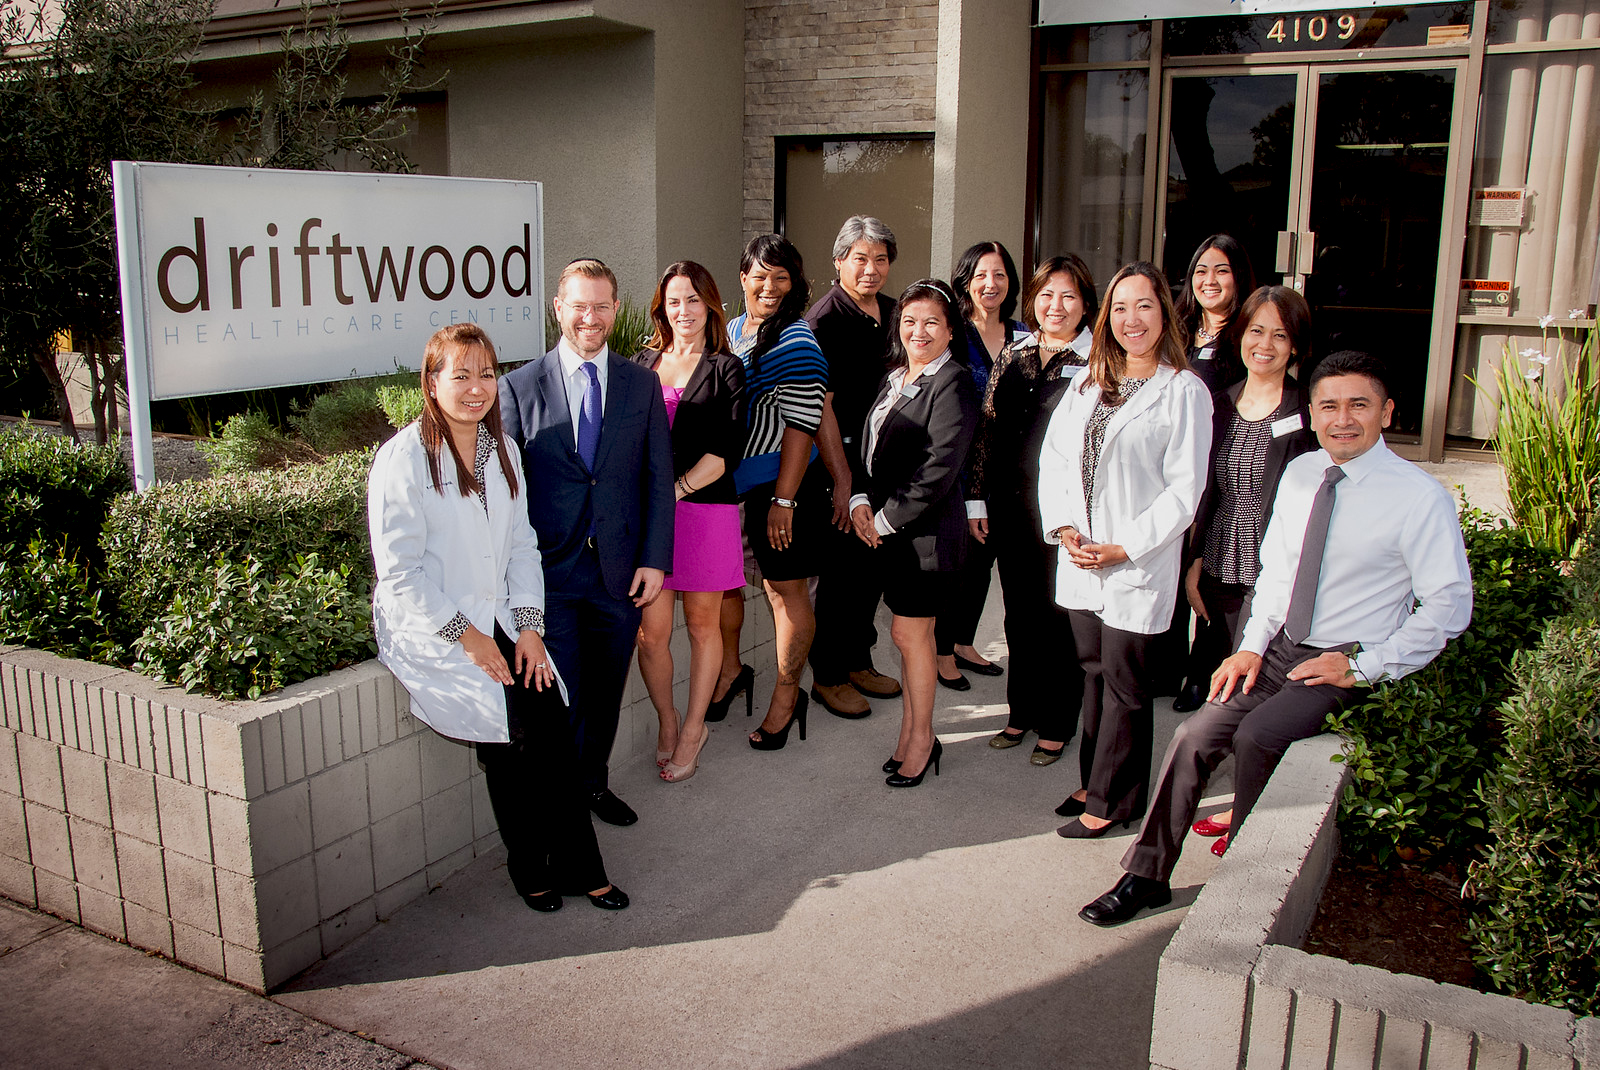 the-staff-welcomes-you-to-driftwood-healthcare-and-rehabilitation-center